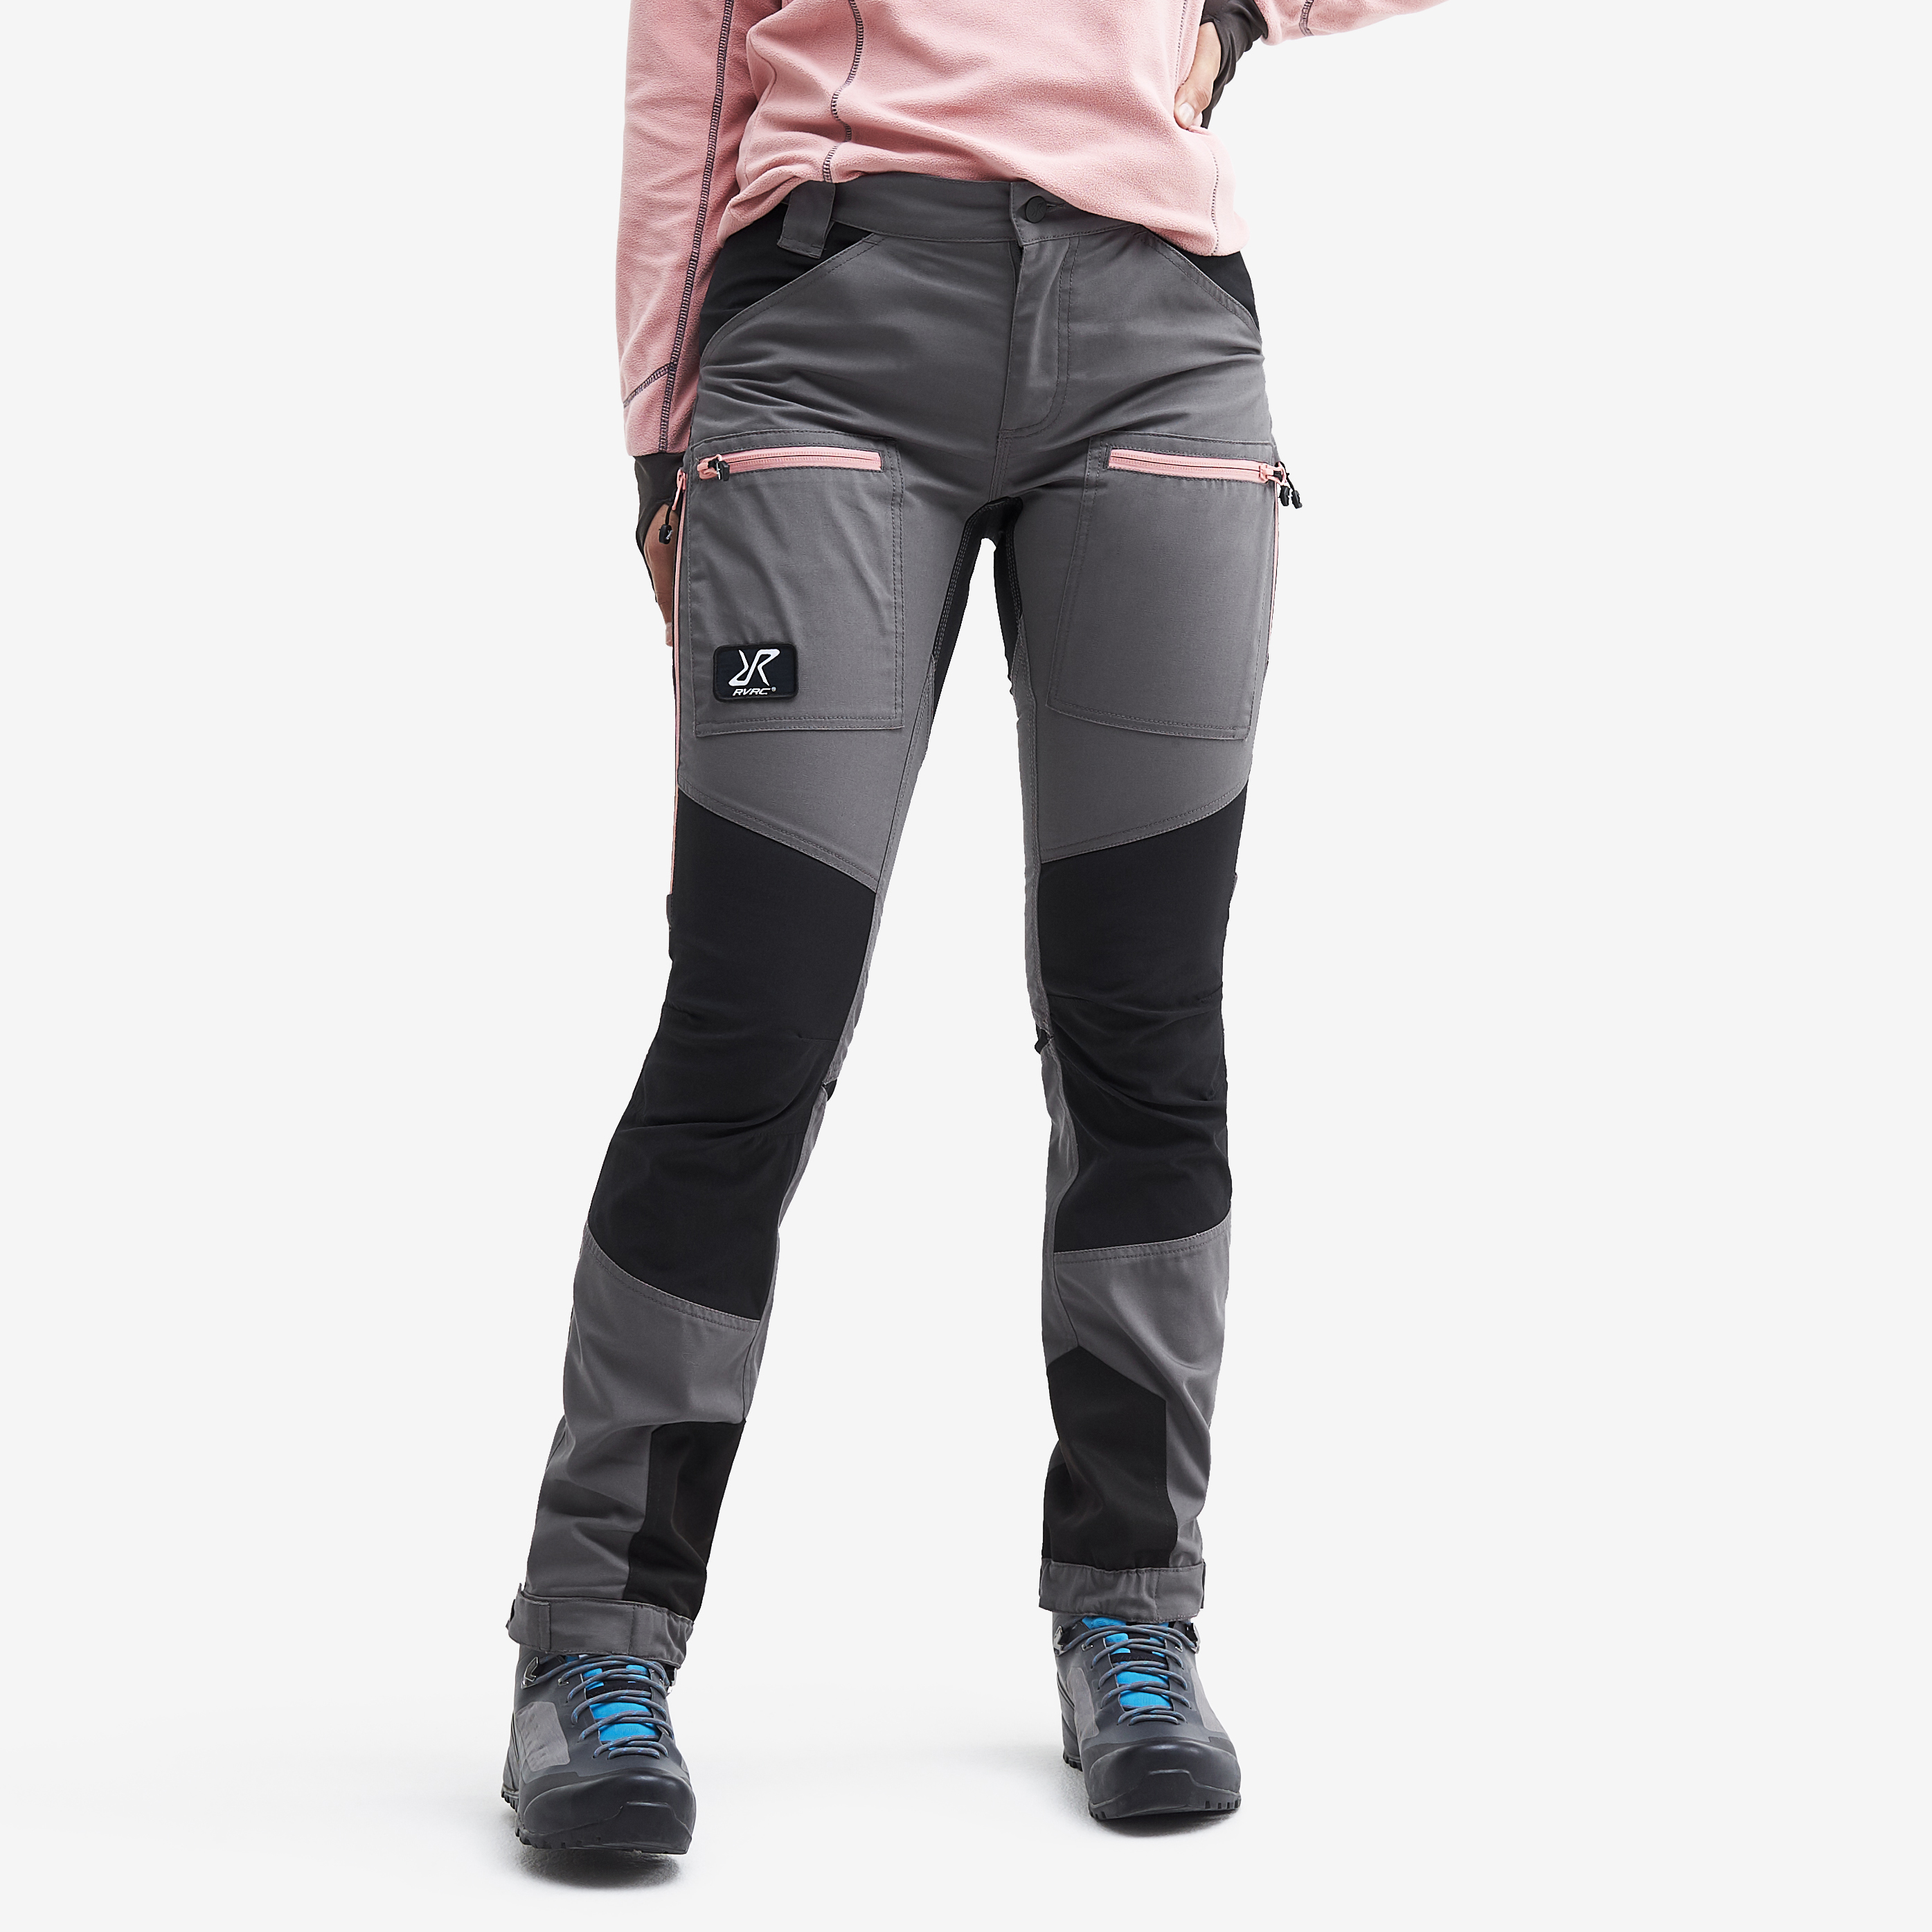 Nordwand Pro Pants Grey/Dusty Pink Mujeres